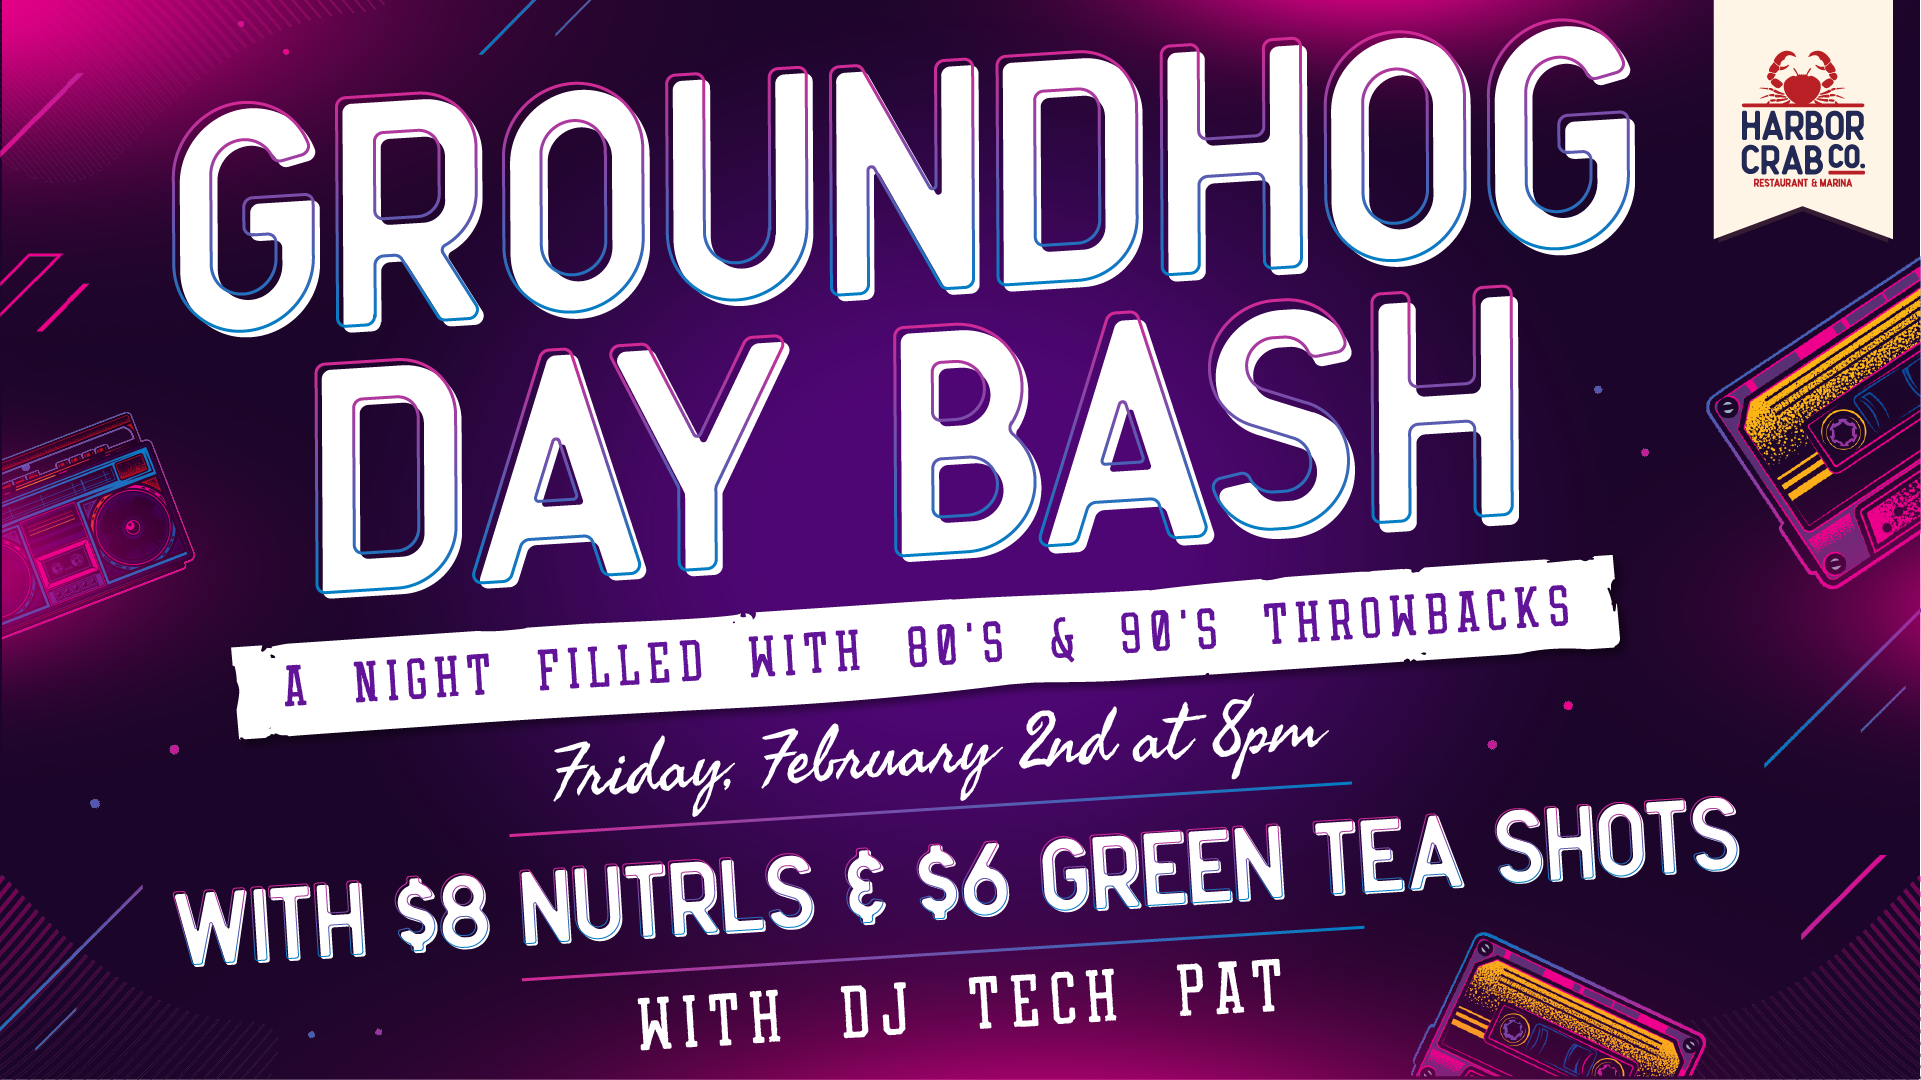 Promotional image for Harbor Crab's Groundhog Day Bash, featuring 80's and 90's music with special drink offers.